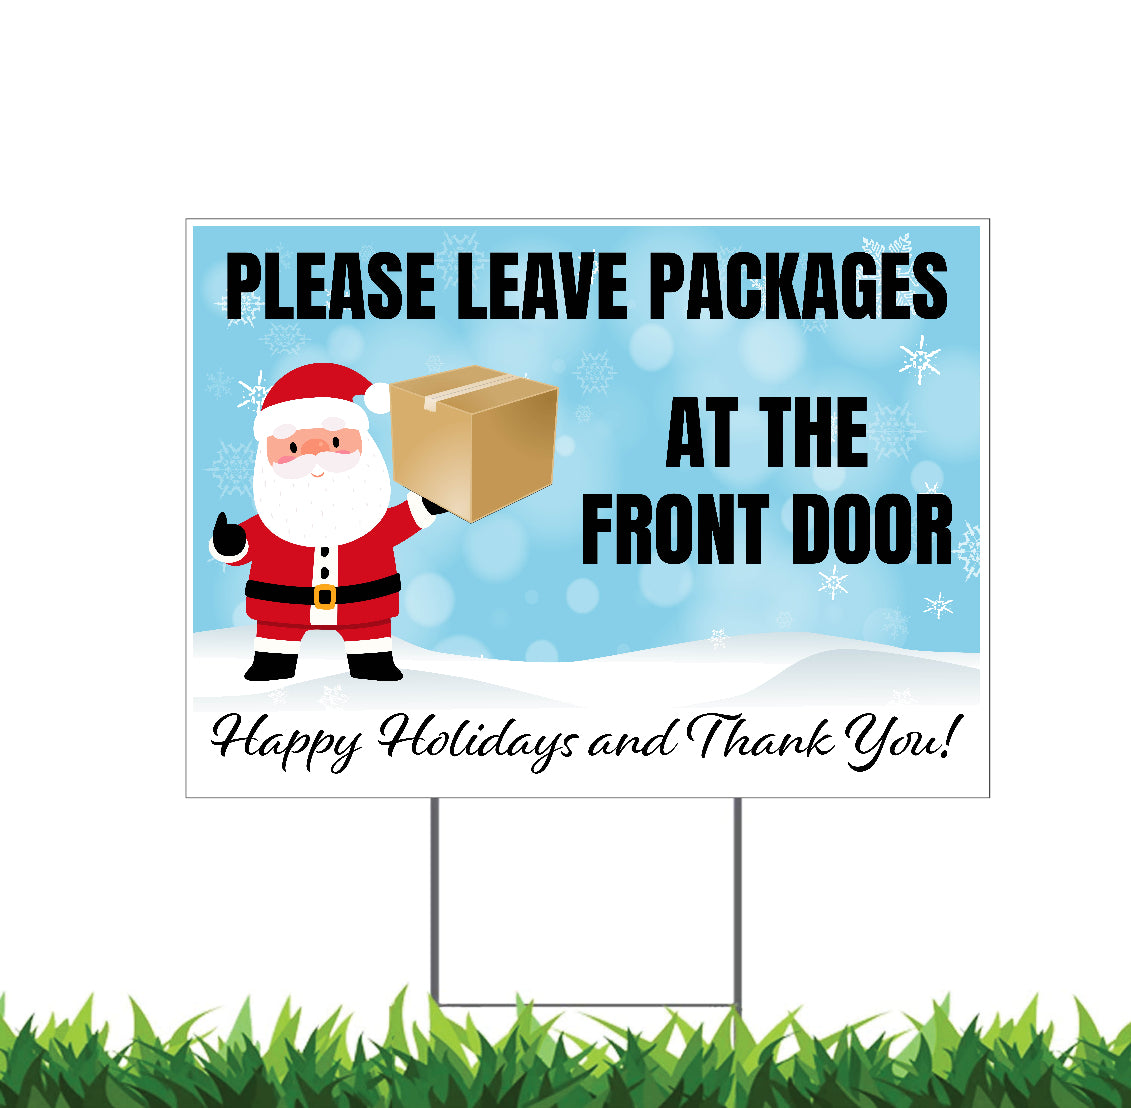 Holiday Packages Leave at the Front Door, 18x12, 24x18, 36x24, H-Stake Included, v2